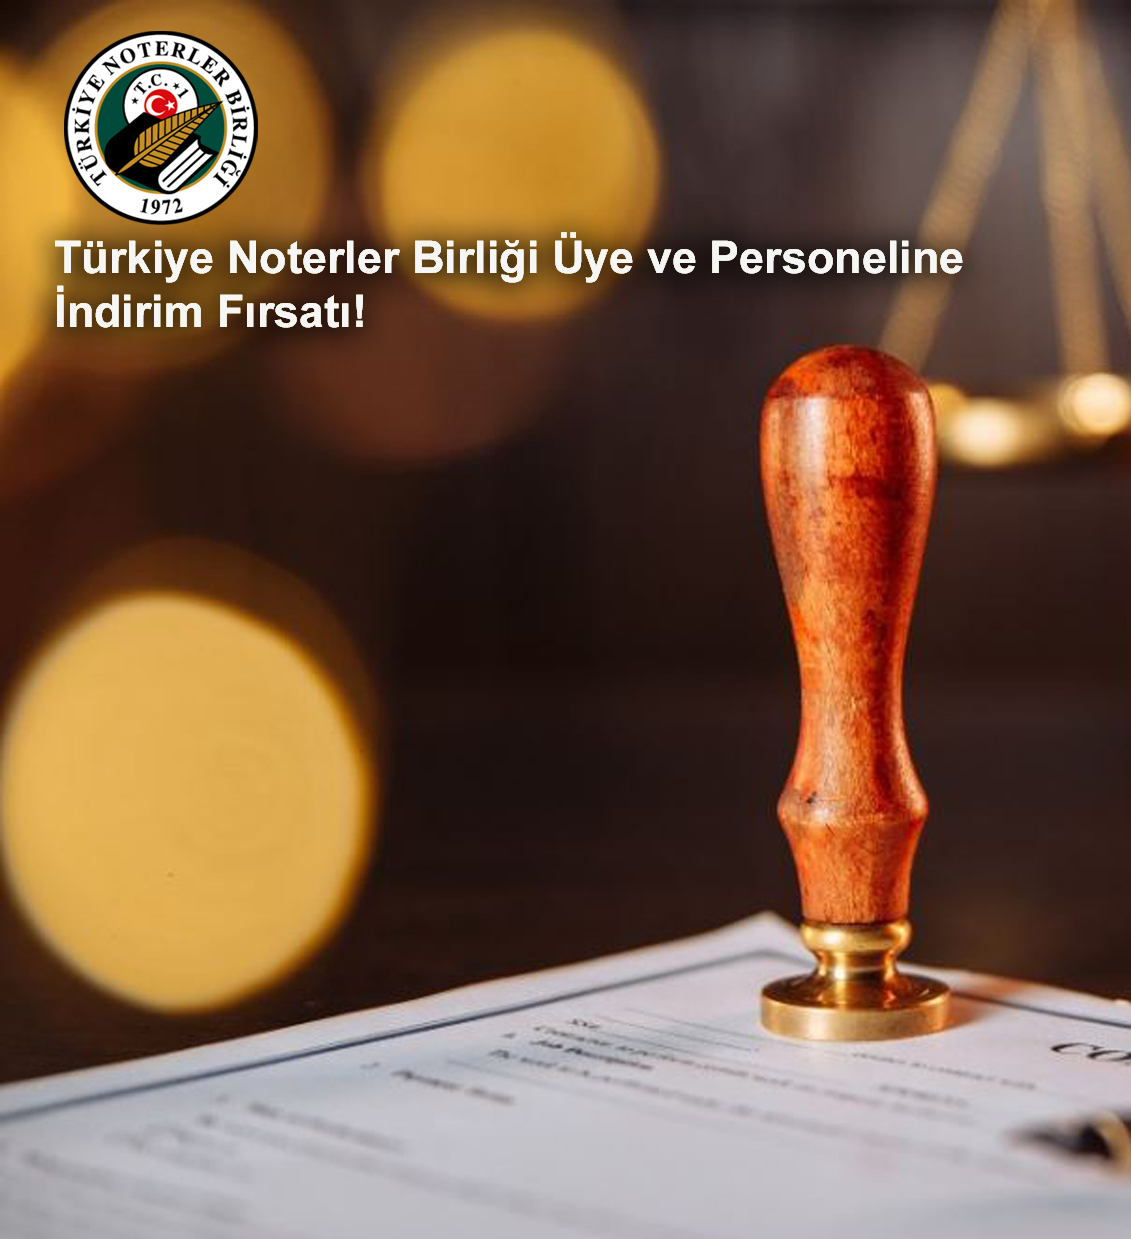 Discount Opportunity for Members and Staff of the Notaries Union of Turkey!